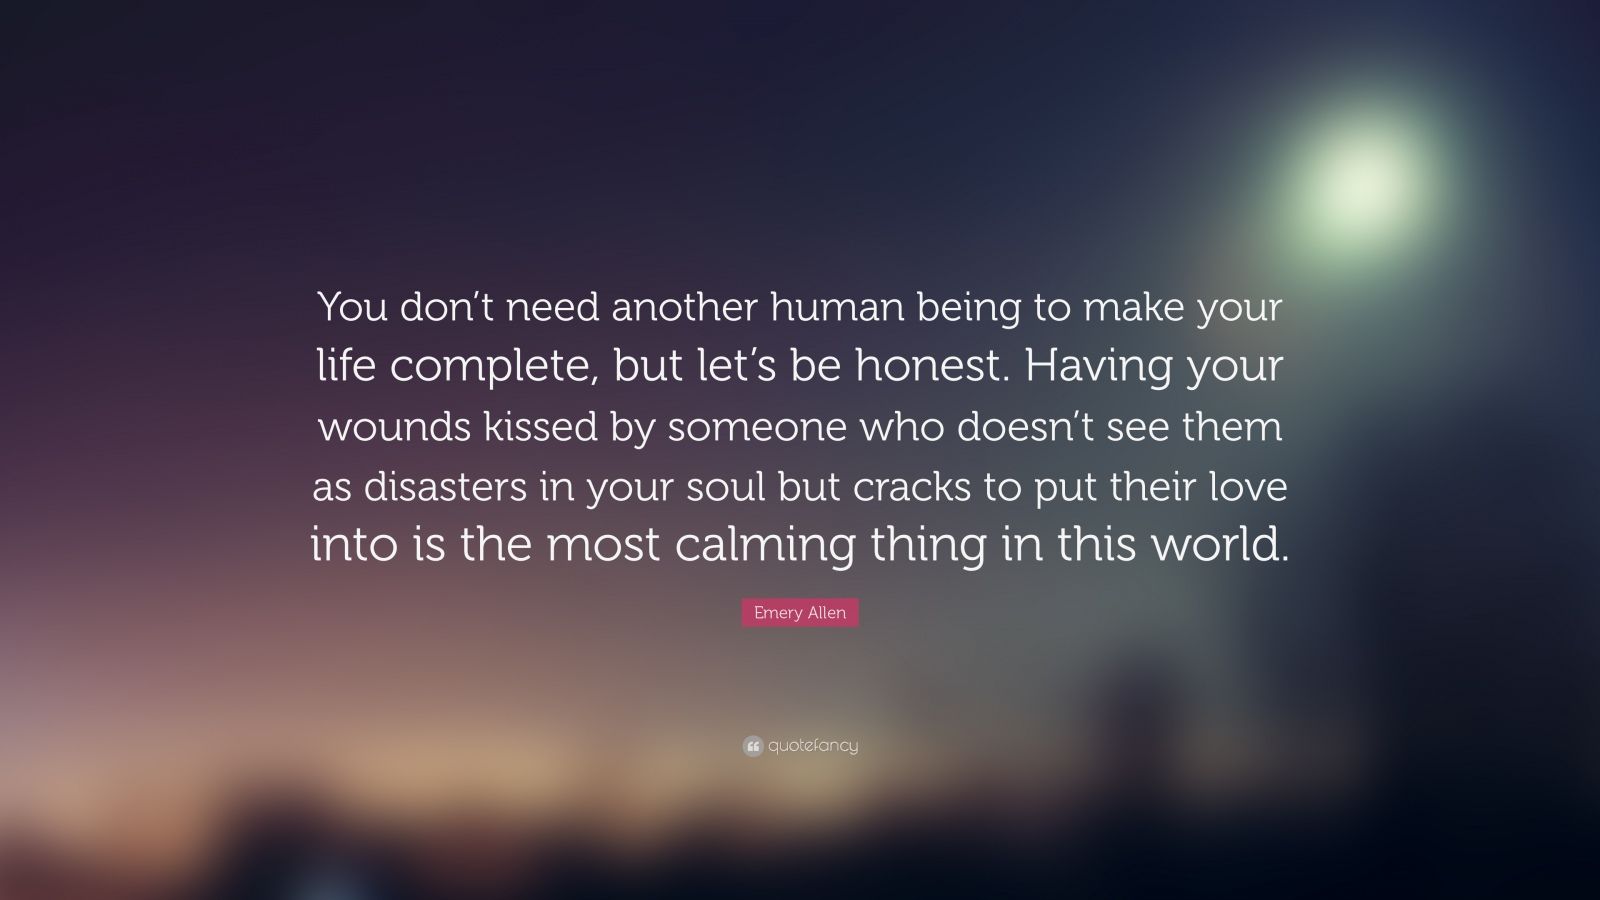 Emery Allen Quote: “You don’t need another human being to make your